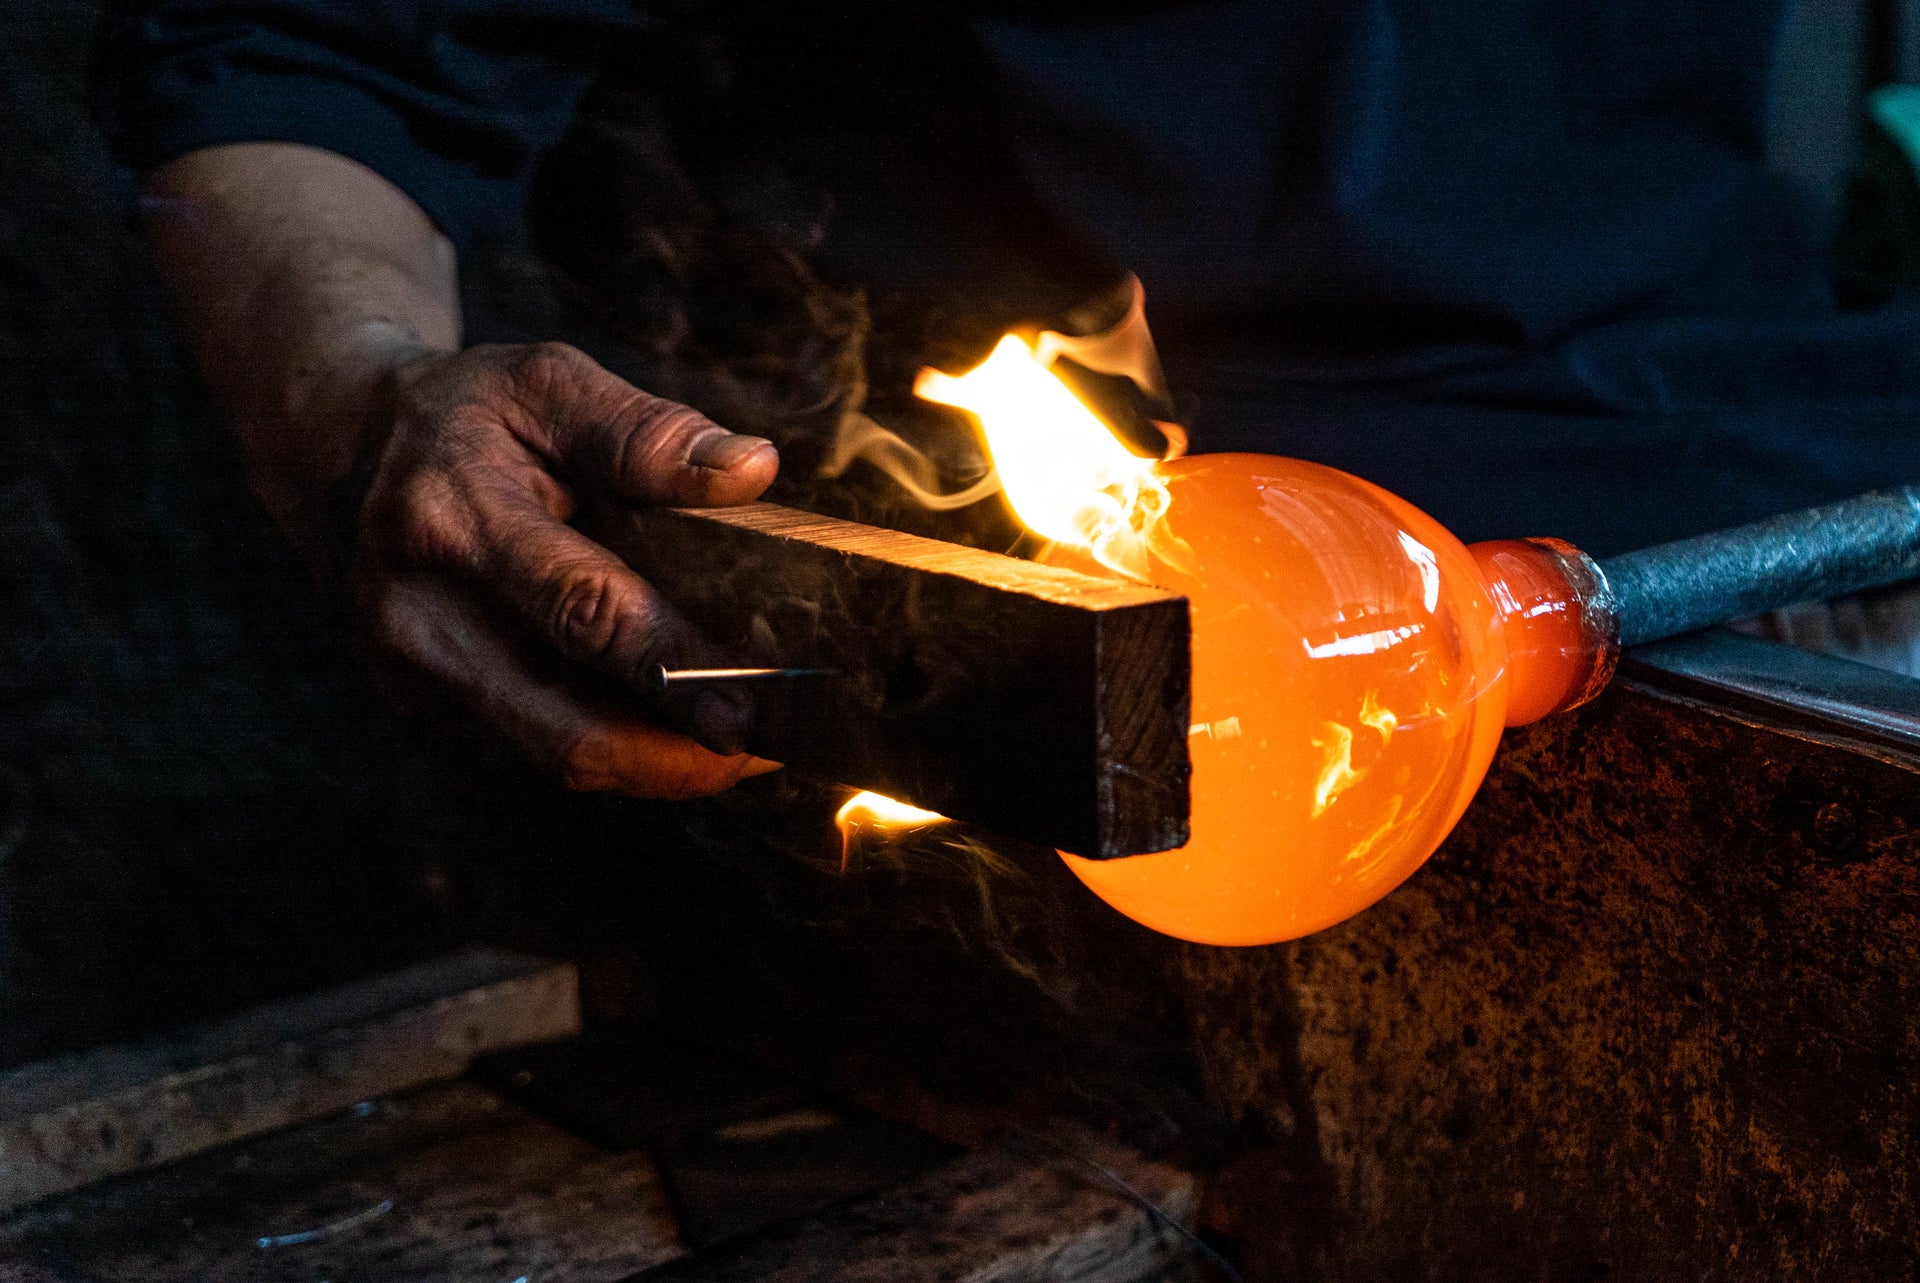 Load video: A video that demonstrates the artisanal glass blowing process